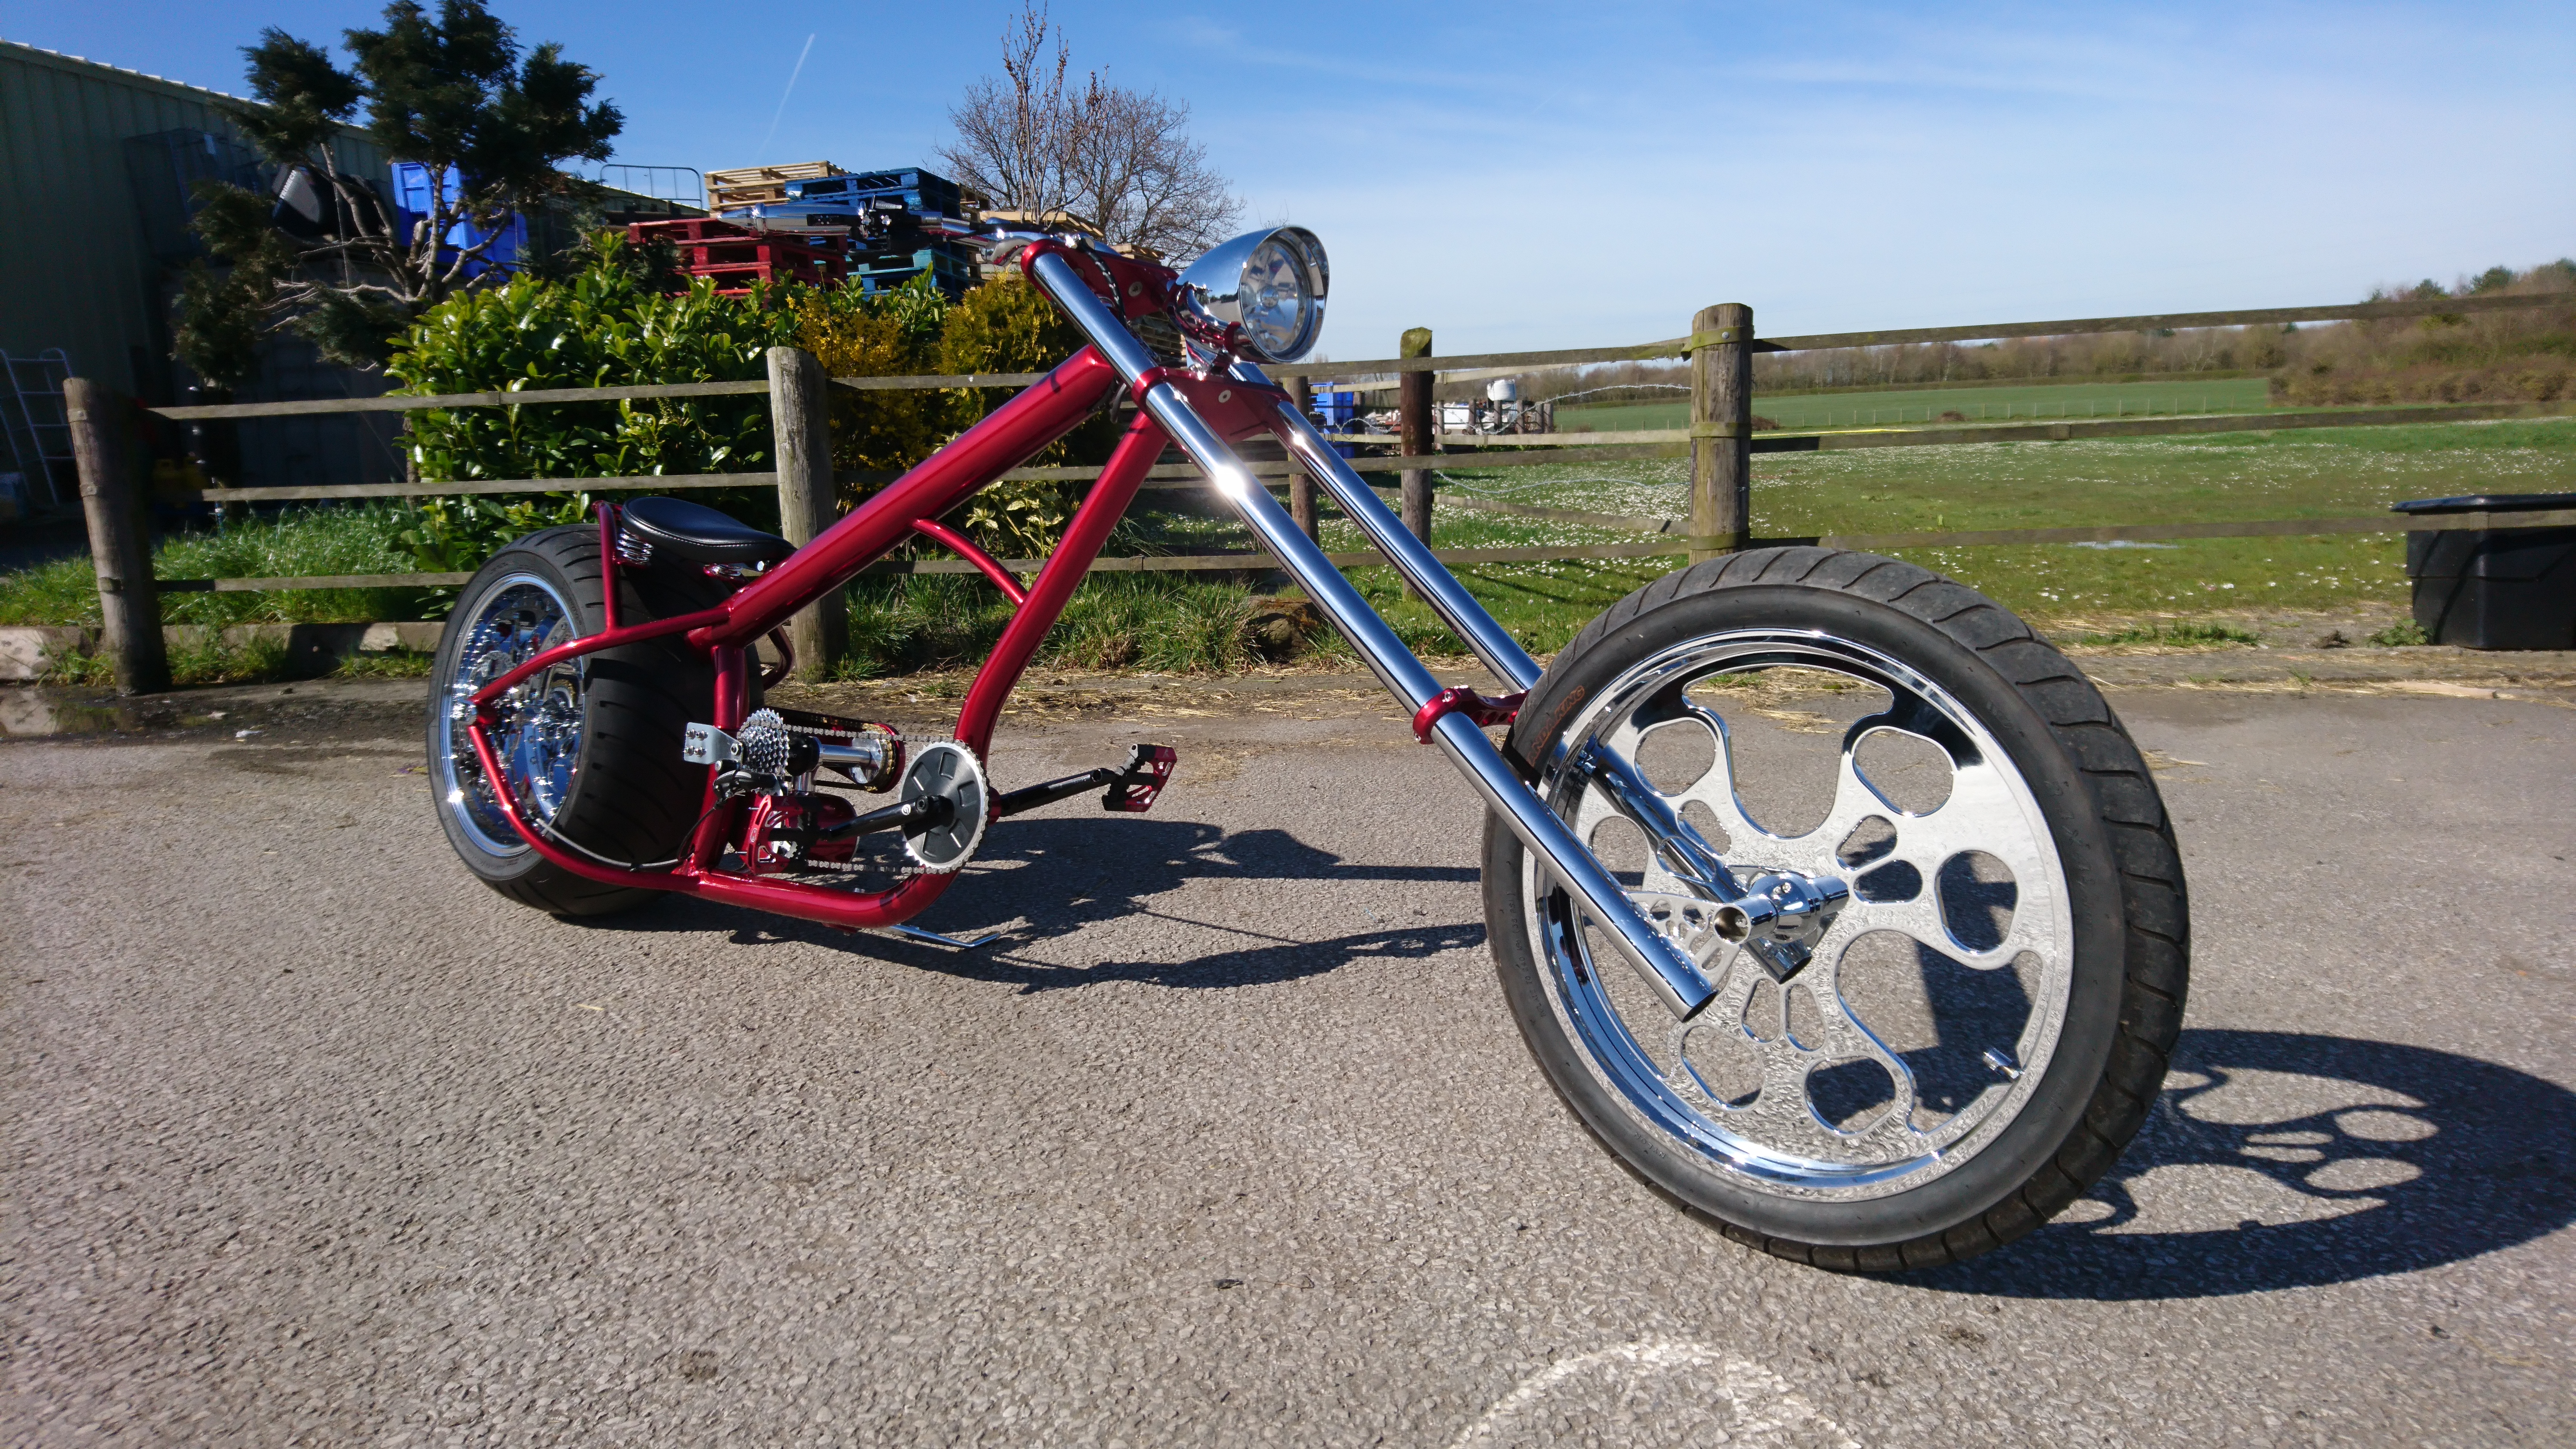 custom chopper bicycles for sale